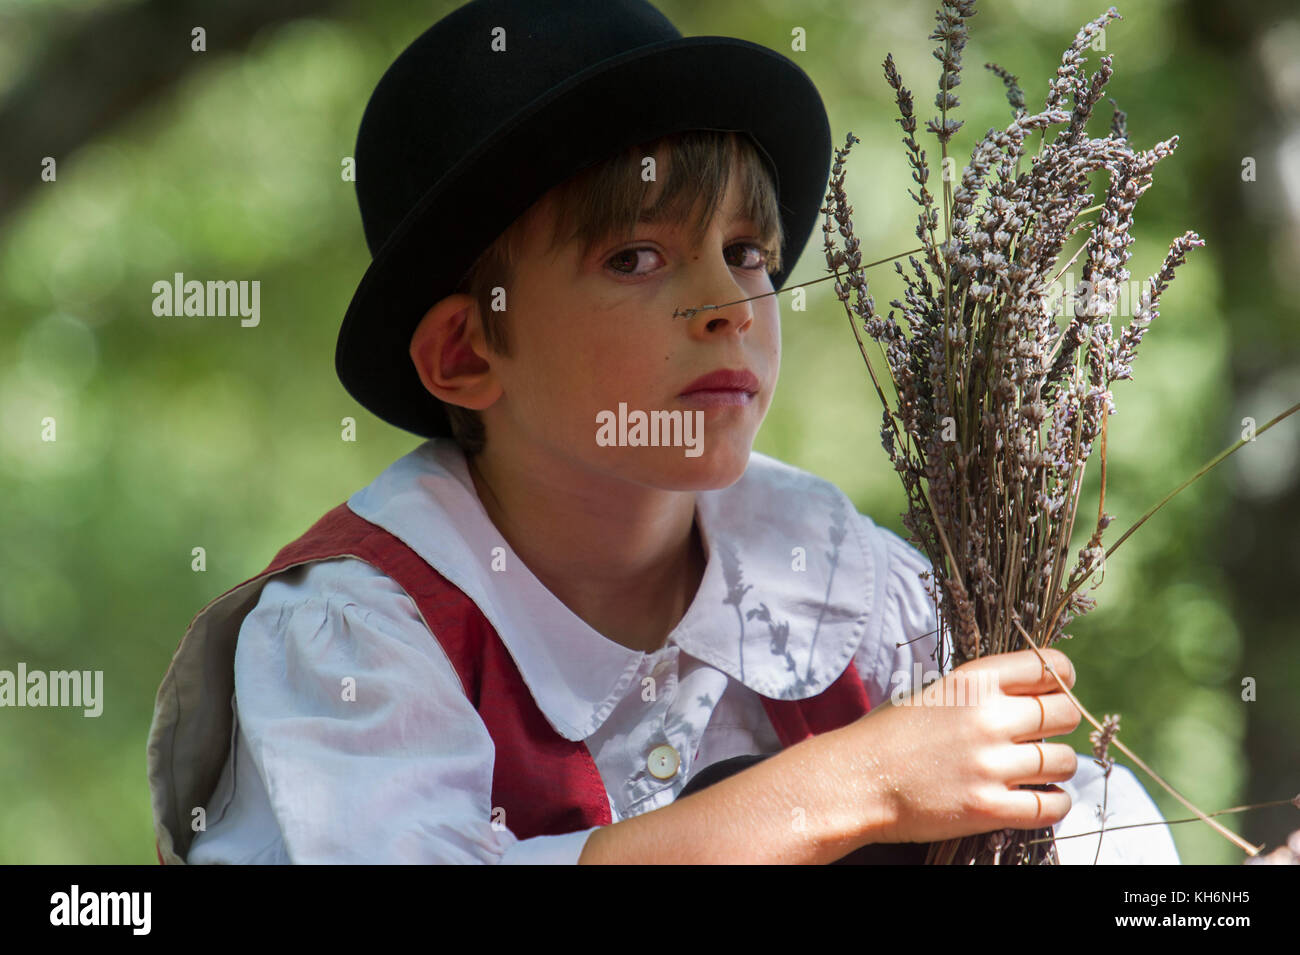 Pays de Sault. Lavender festival, young boy in costume. Stock Photo